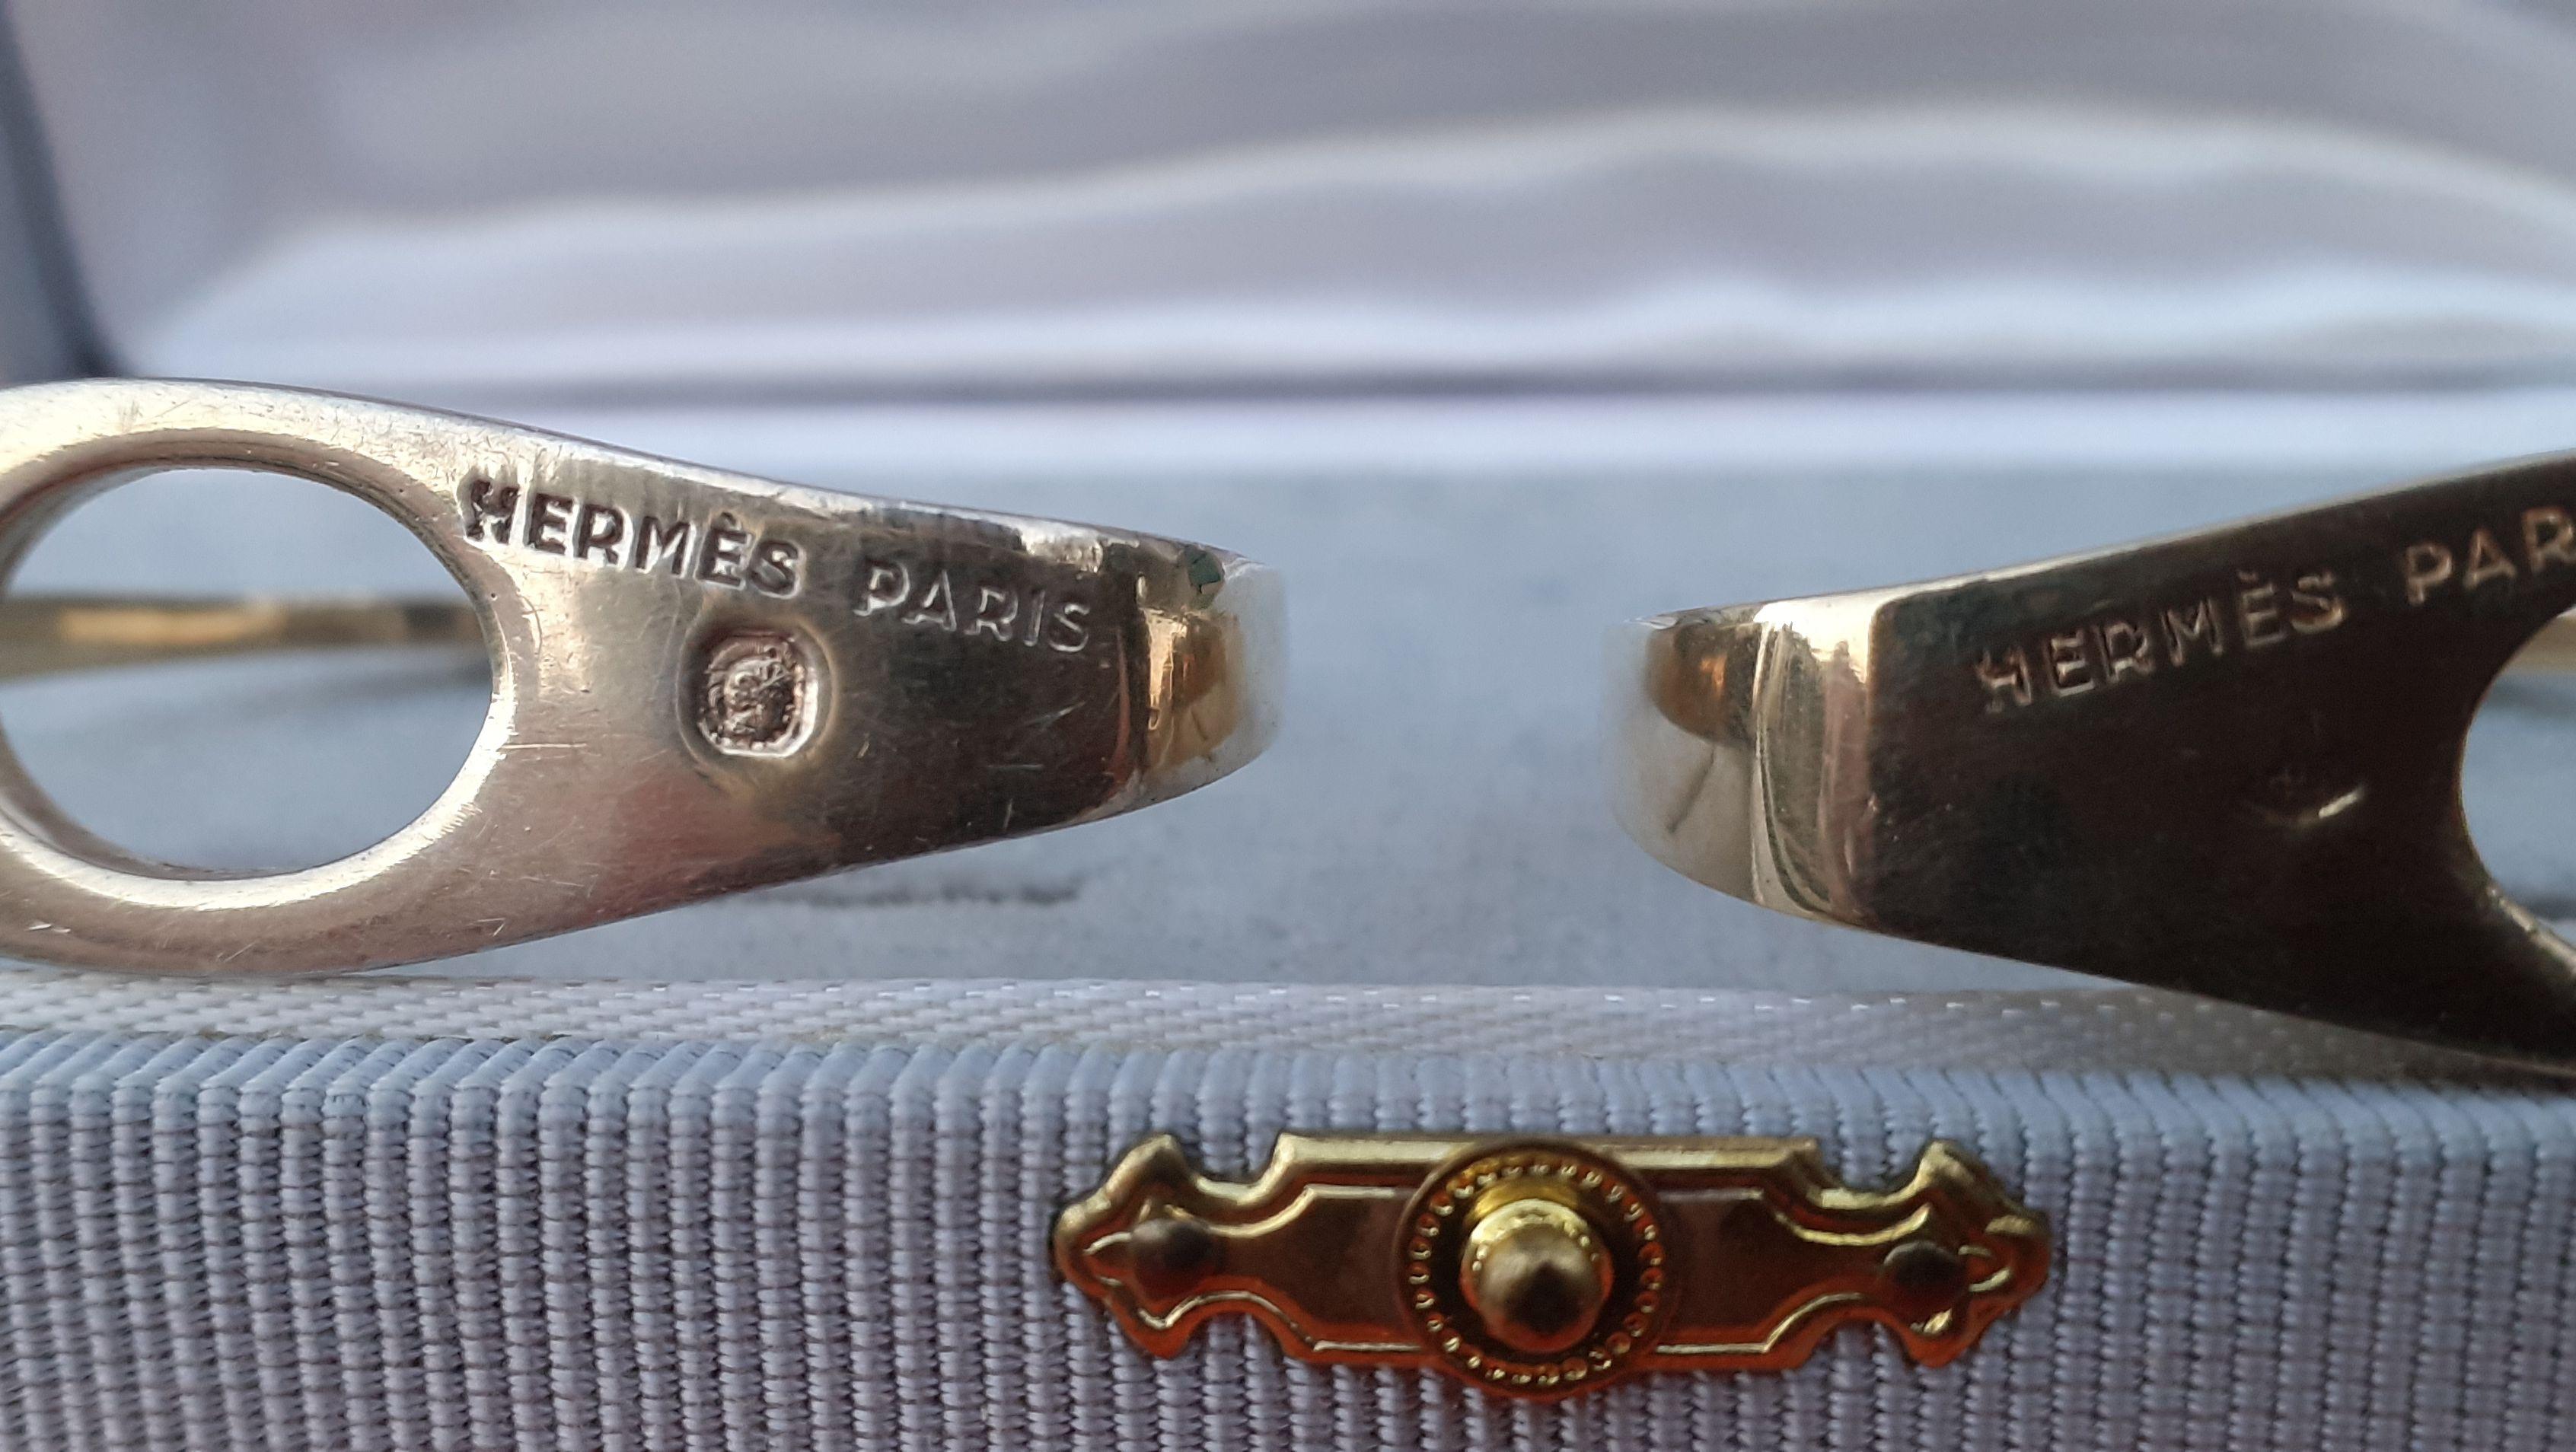 Exceptional Hermès Set of 2 Napkin Rings Stirrups Shaped in Silver-Gilt Texas For Sale 7